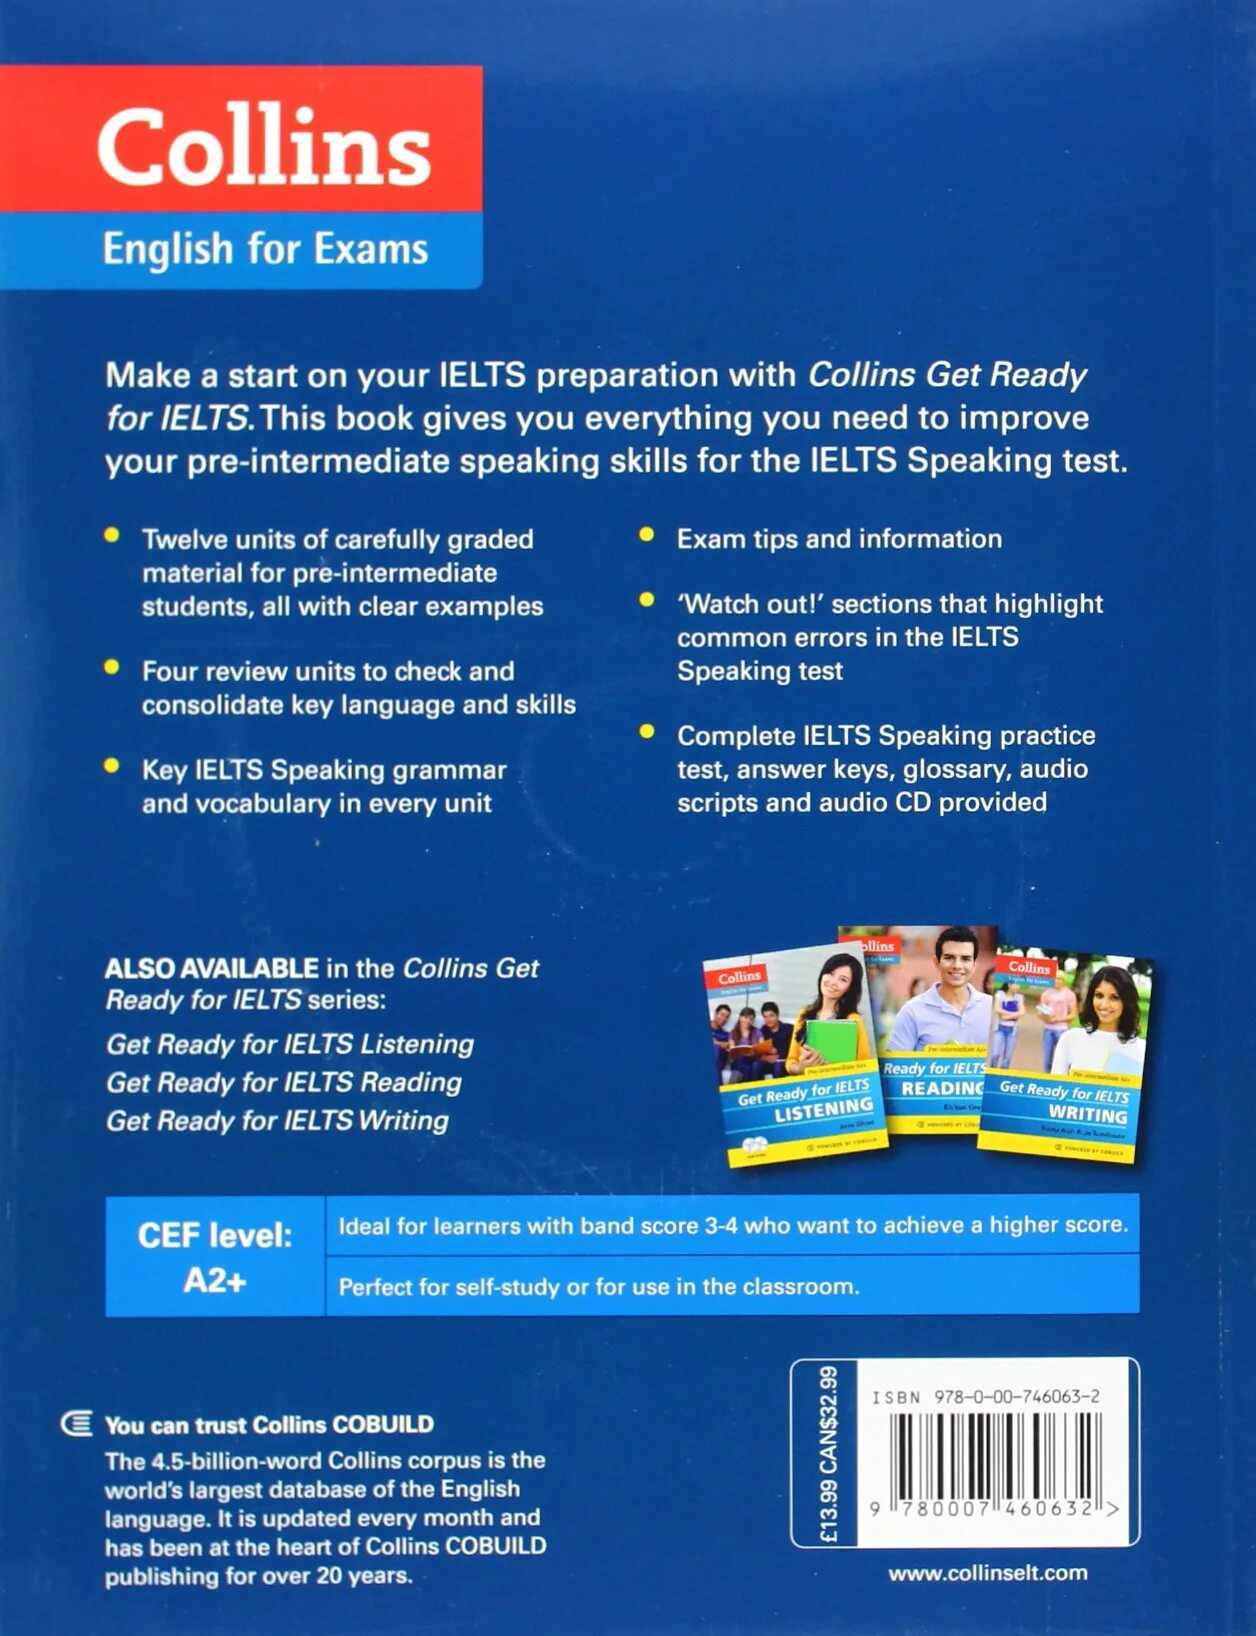 Ready for exams. Collins speaking for IELTS. Get ready for IELTS. Collins English for Exams. Collins Grammar for IELTS.